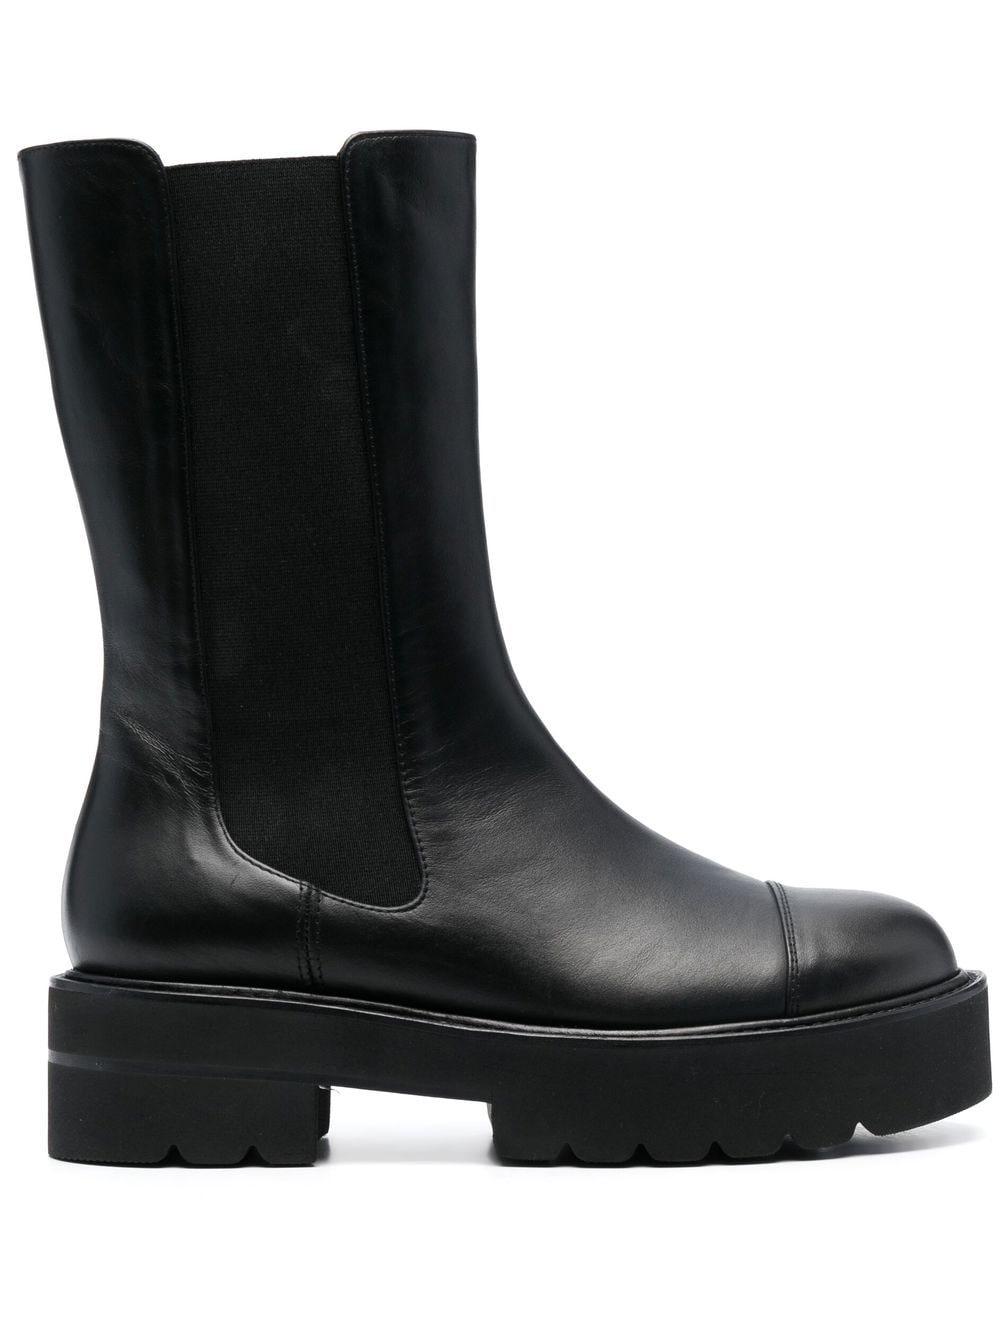 Stuart Weitzman Presley Leather Chunky Boots in Black | Lyst Canada